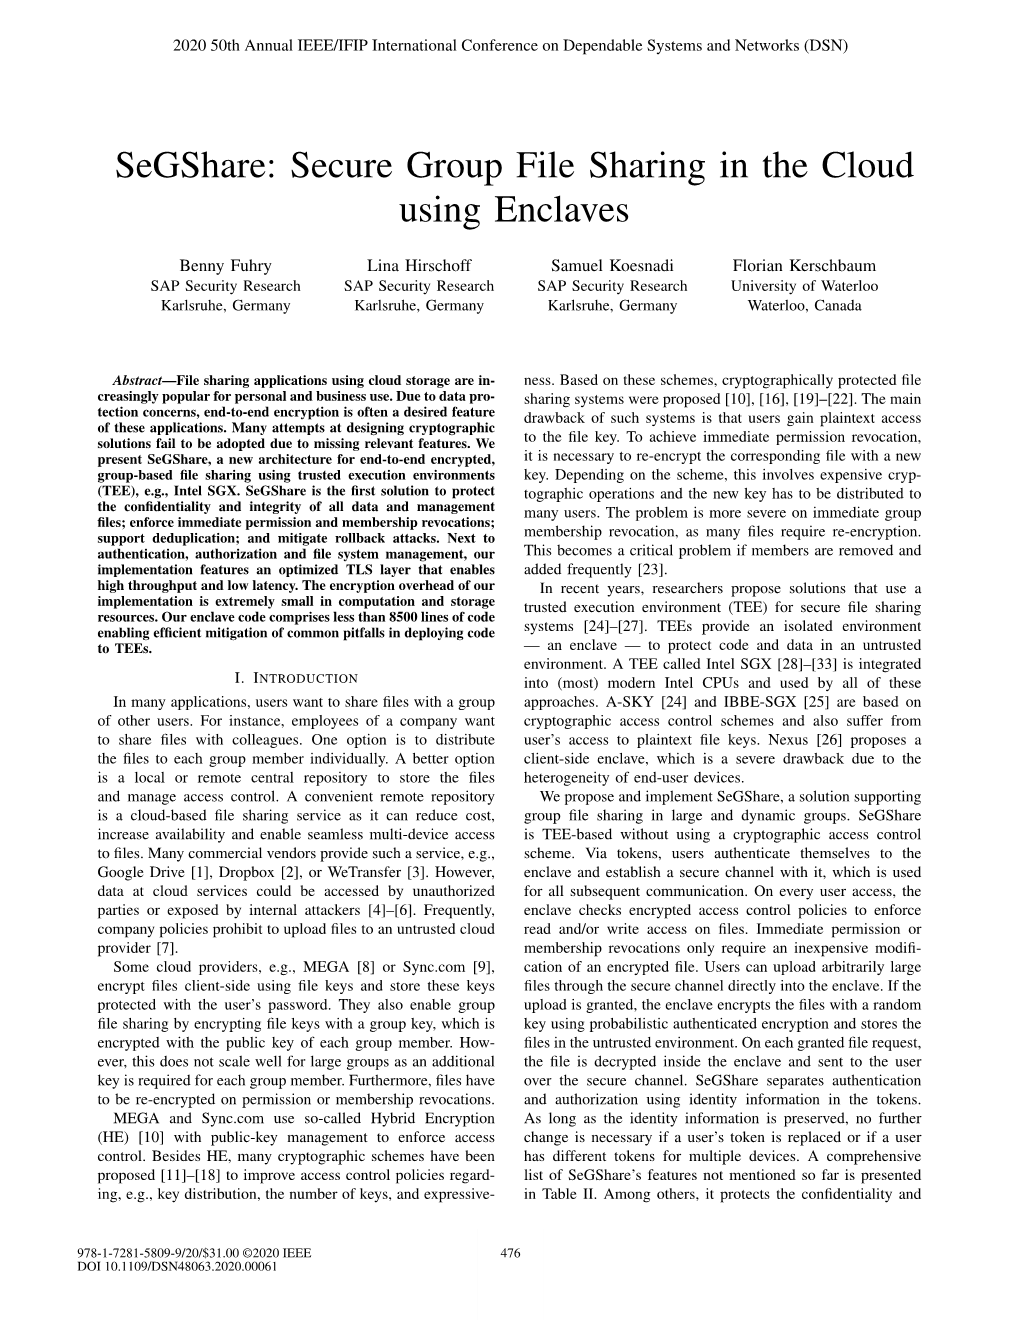 Segshare: Secure Group File Sharing in the Cloud Using Enclaves